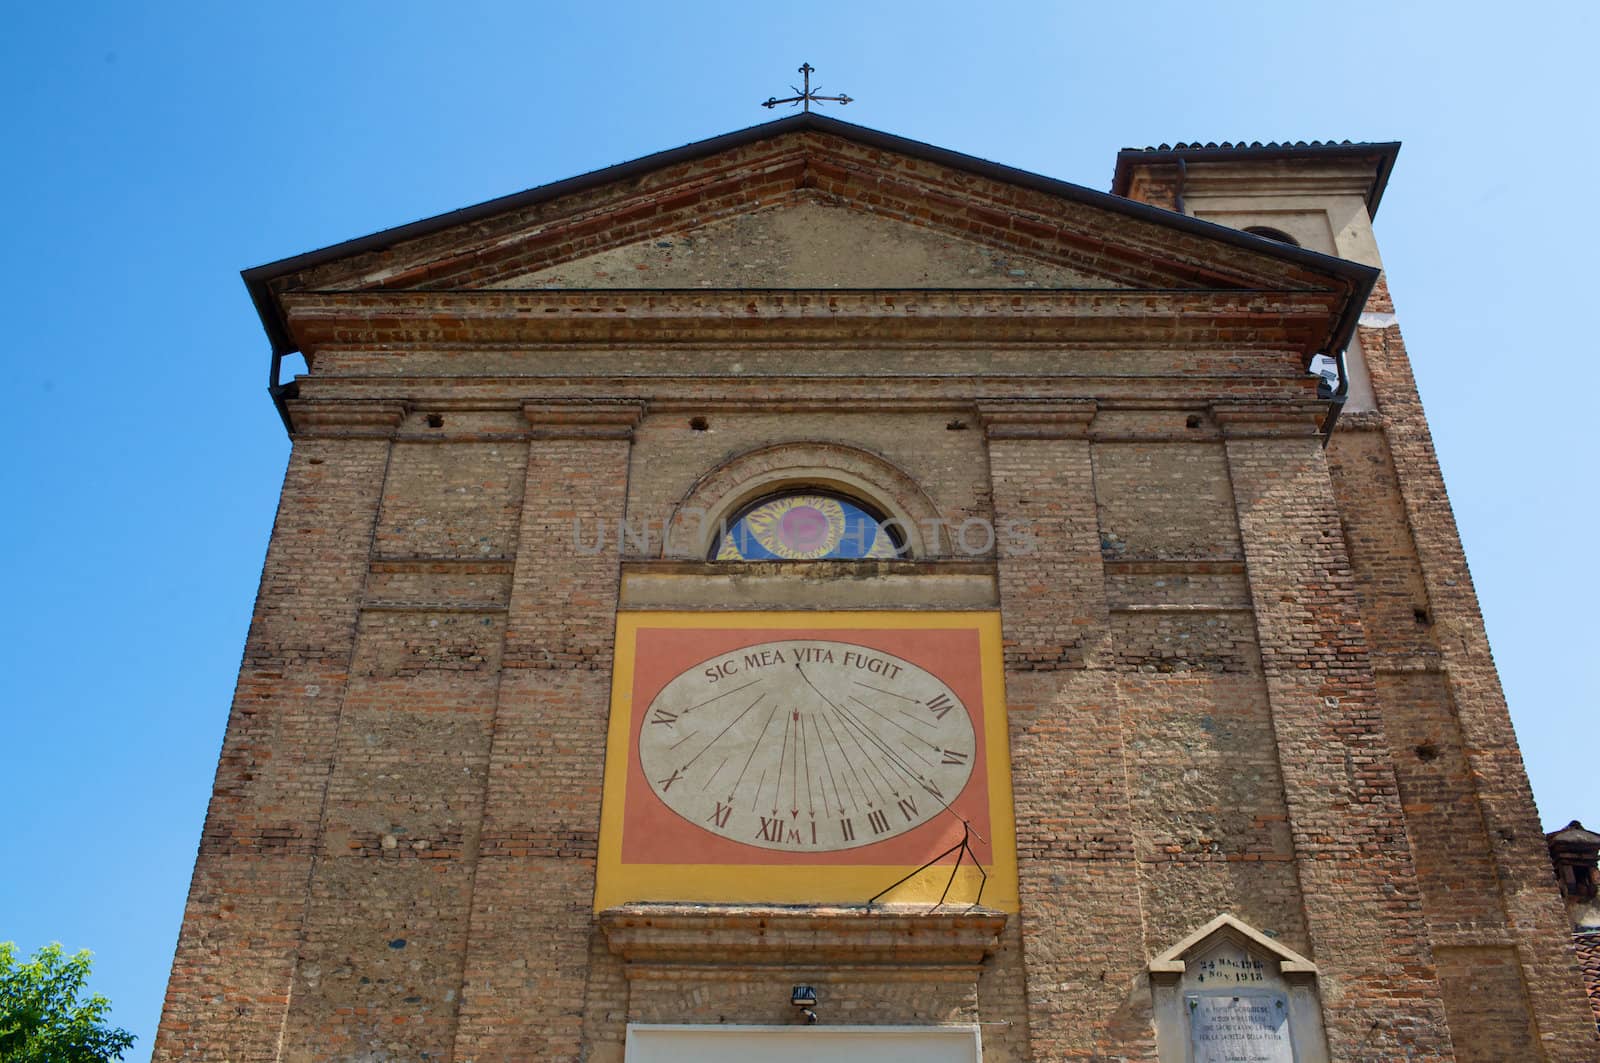 A church with a sundial in Torino, Italy.